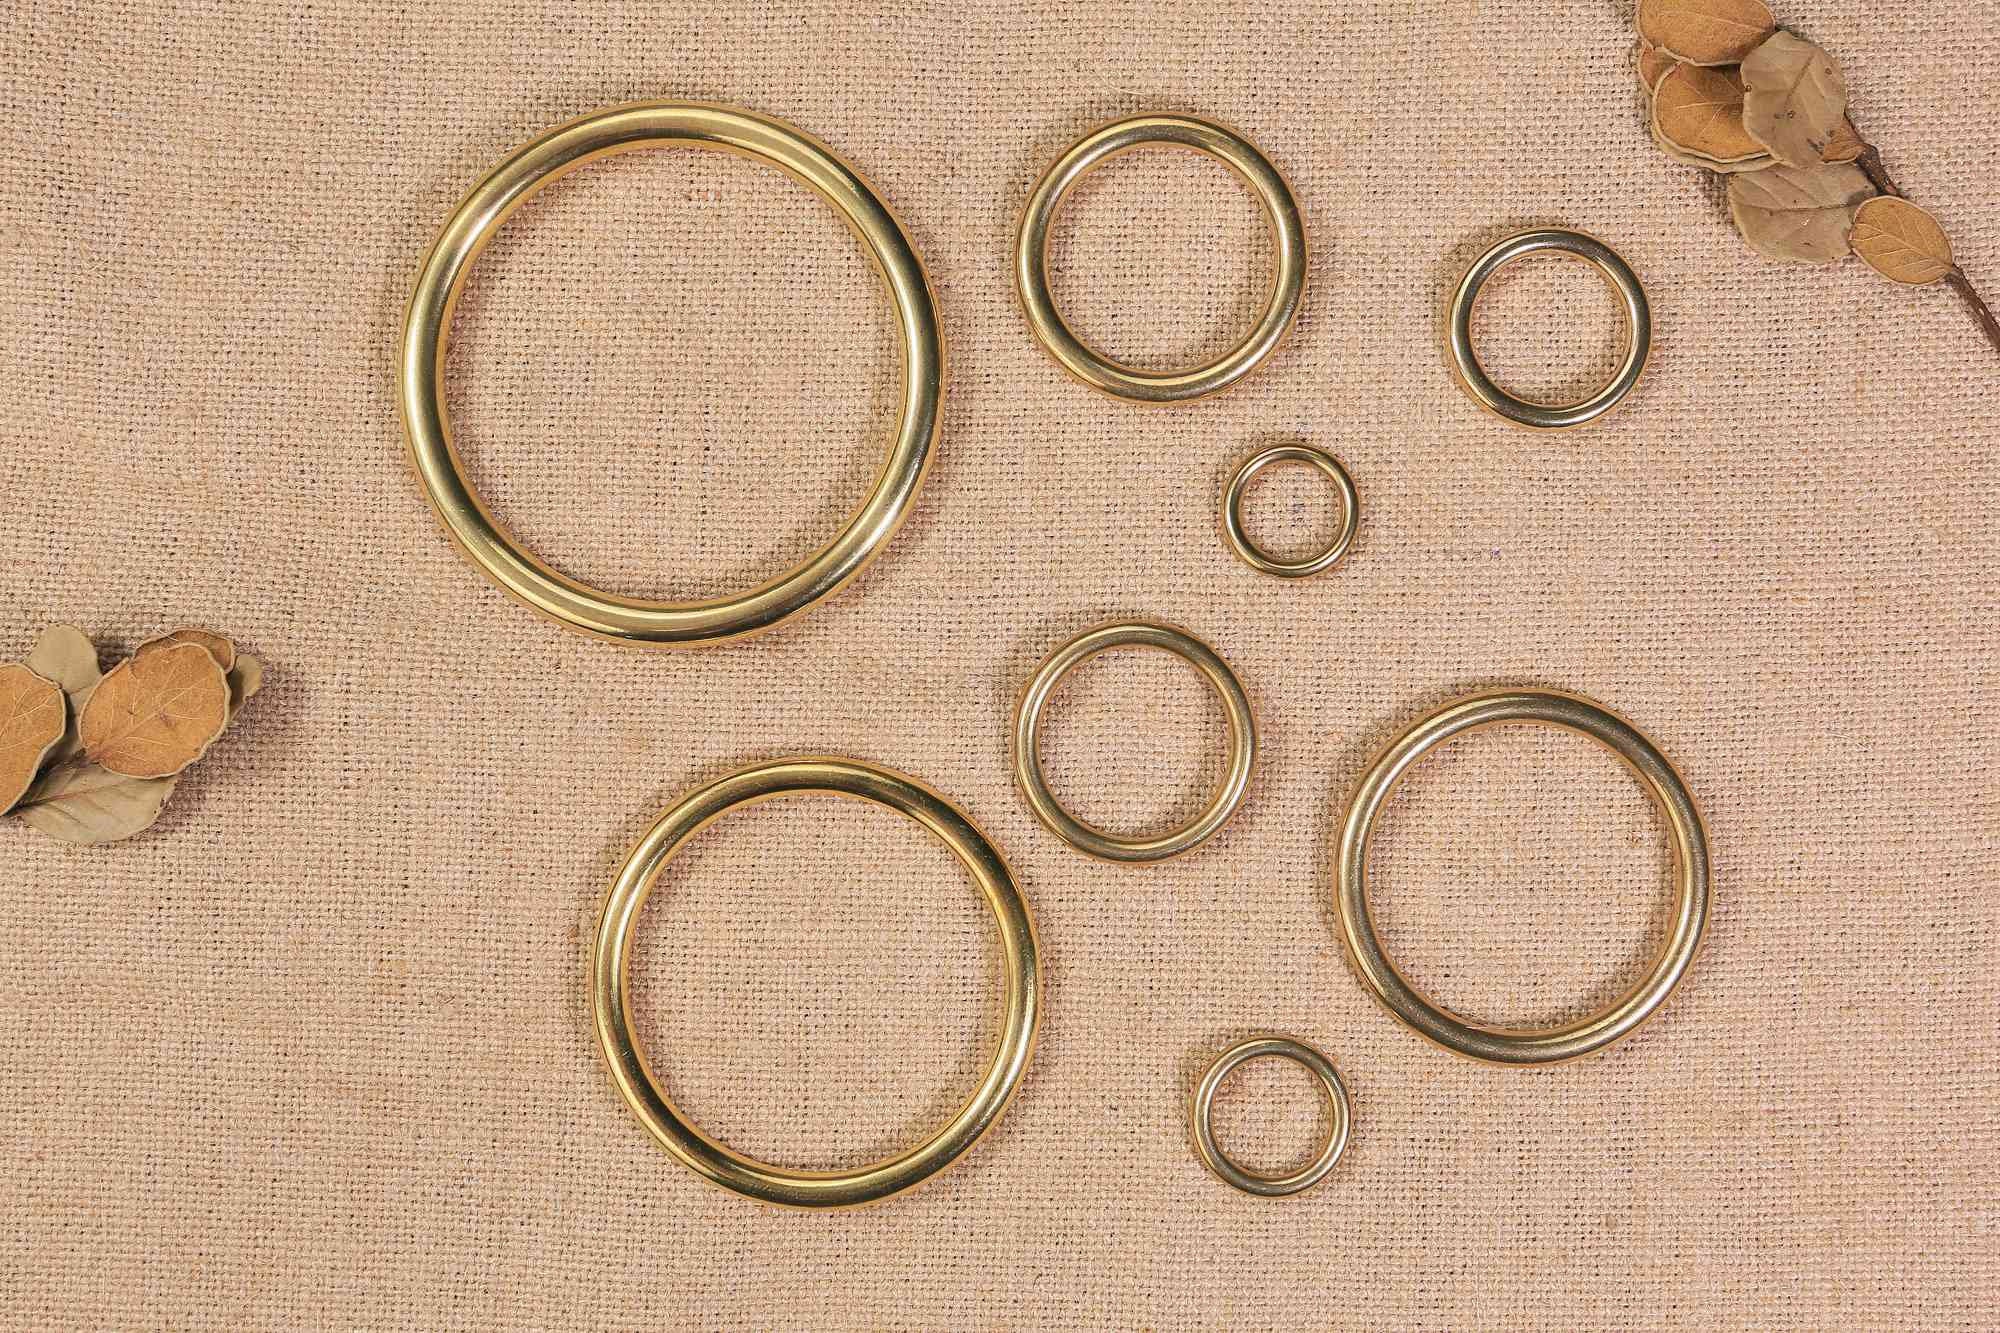 Lot 6 etched GOLD Round flat Metal circle craft Rings Ring 1.875 Heavy Duty